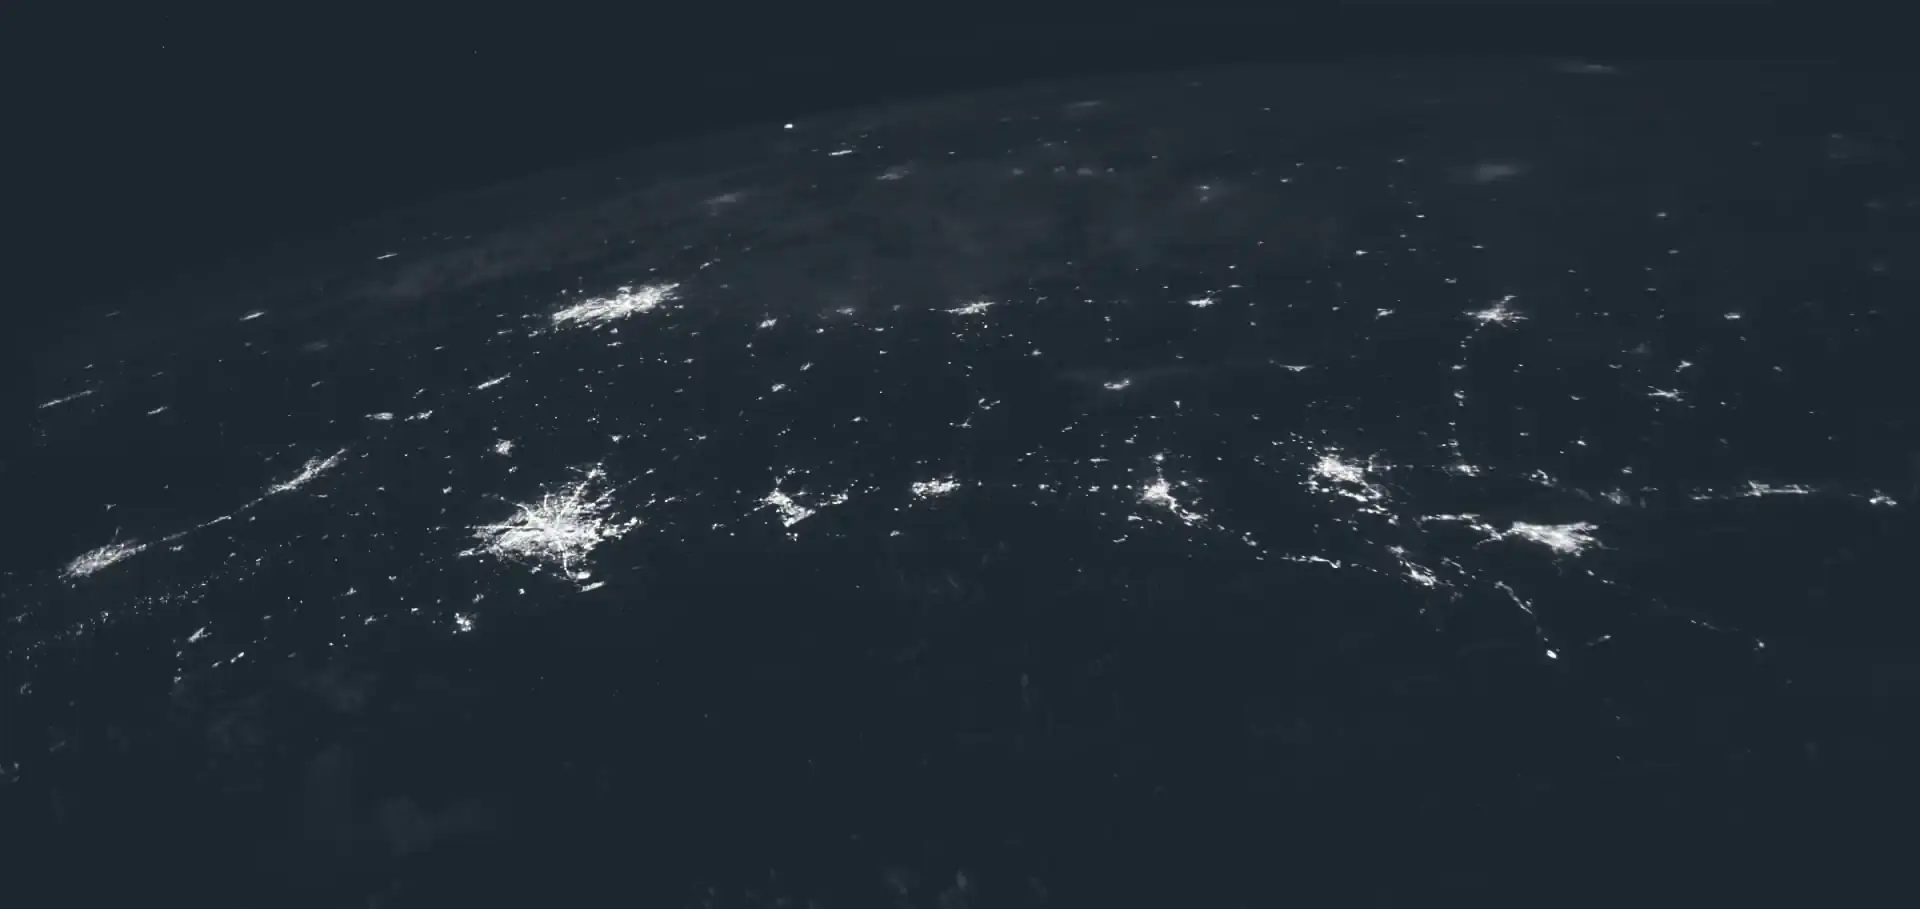 orbital photo overlooking Earth at night taken from the International Space Station